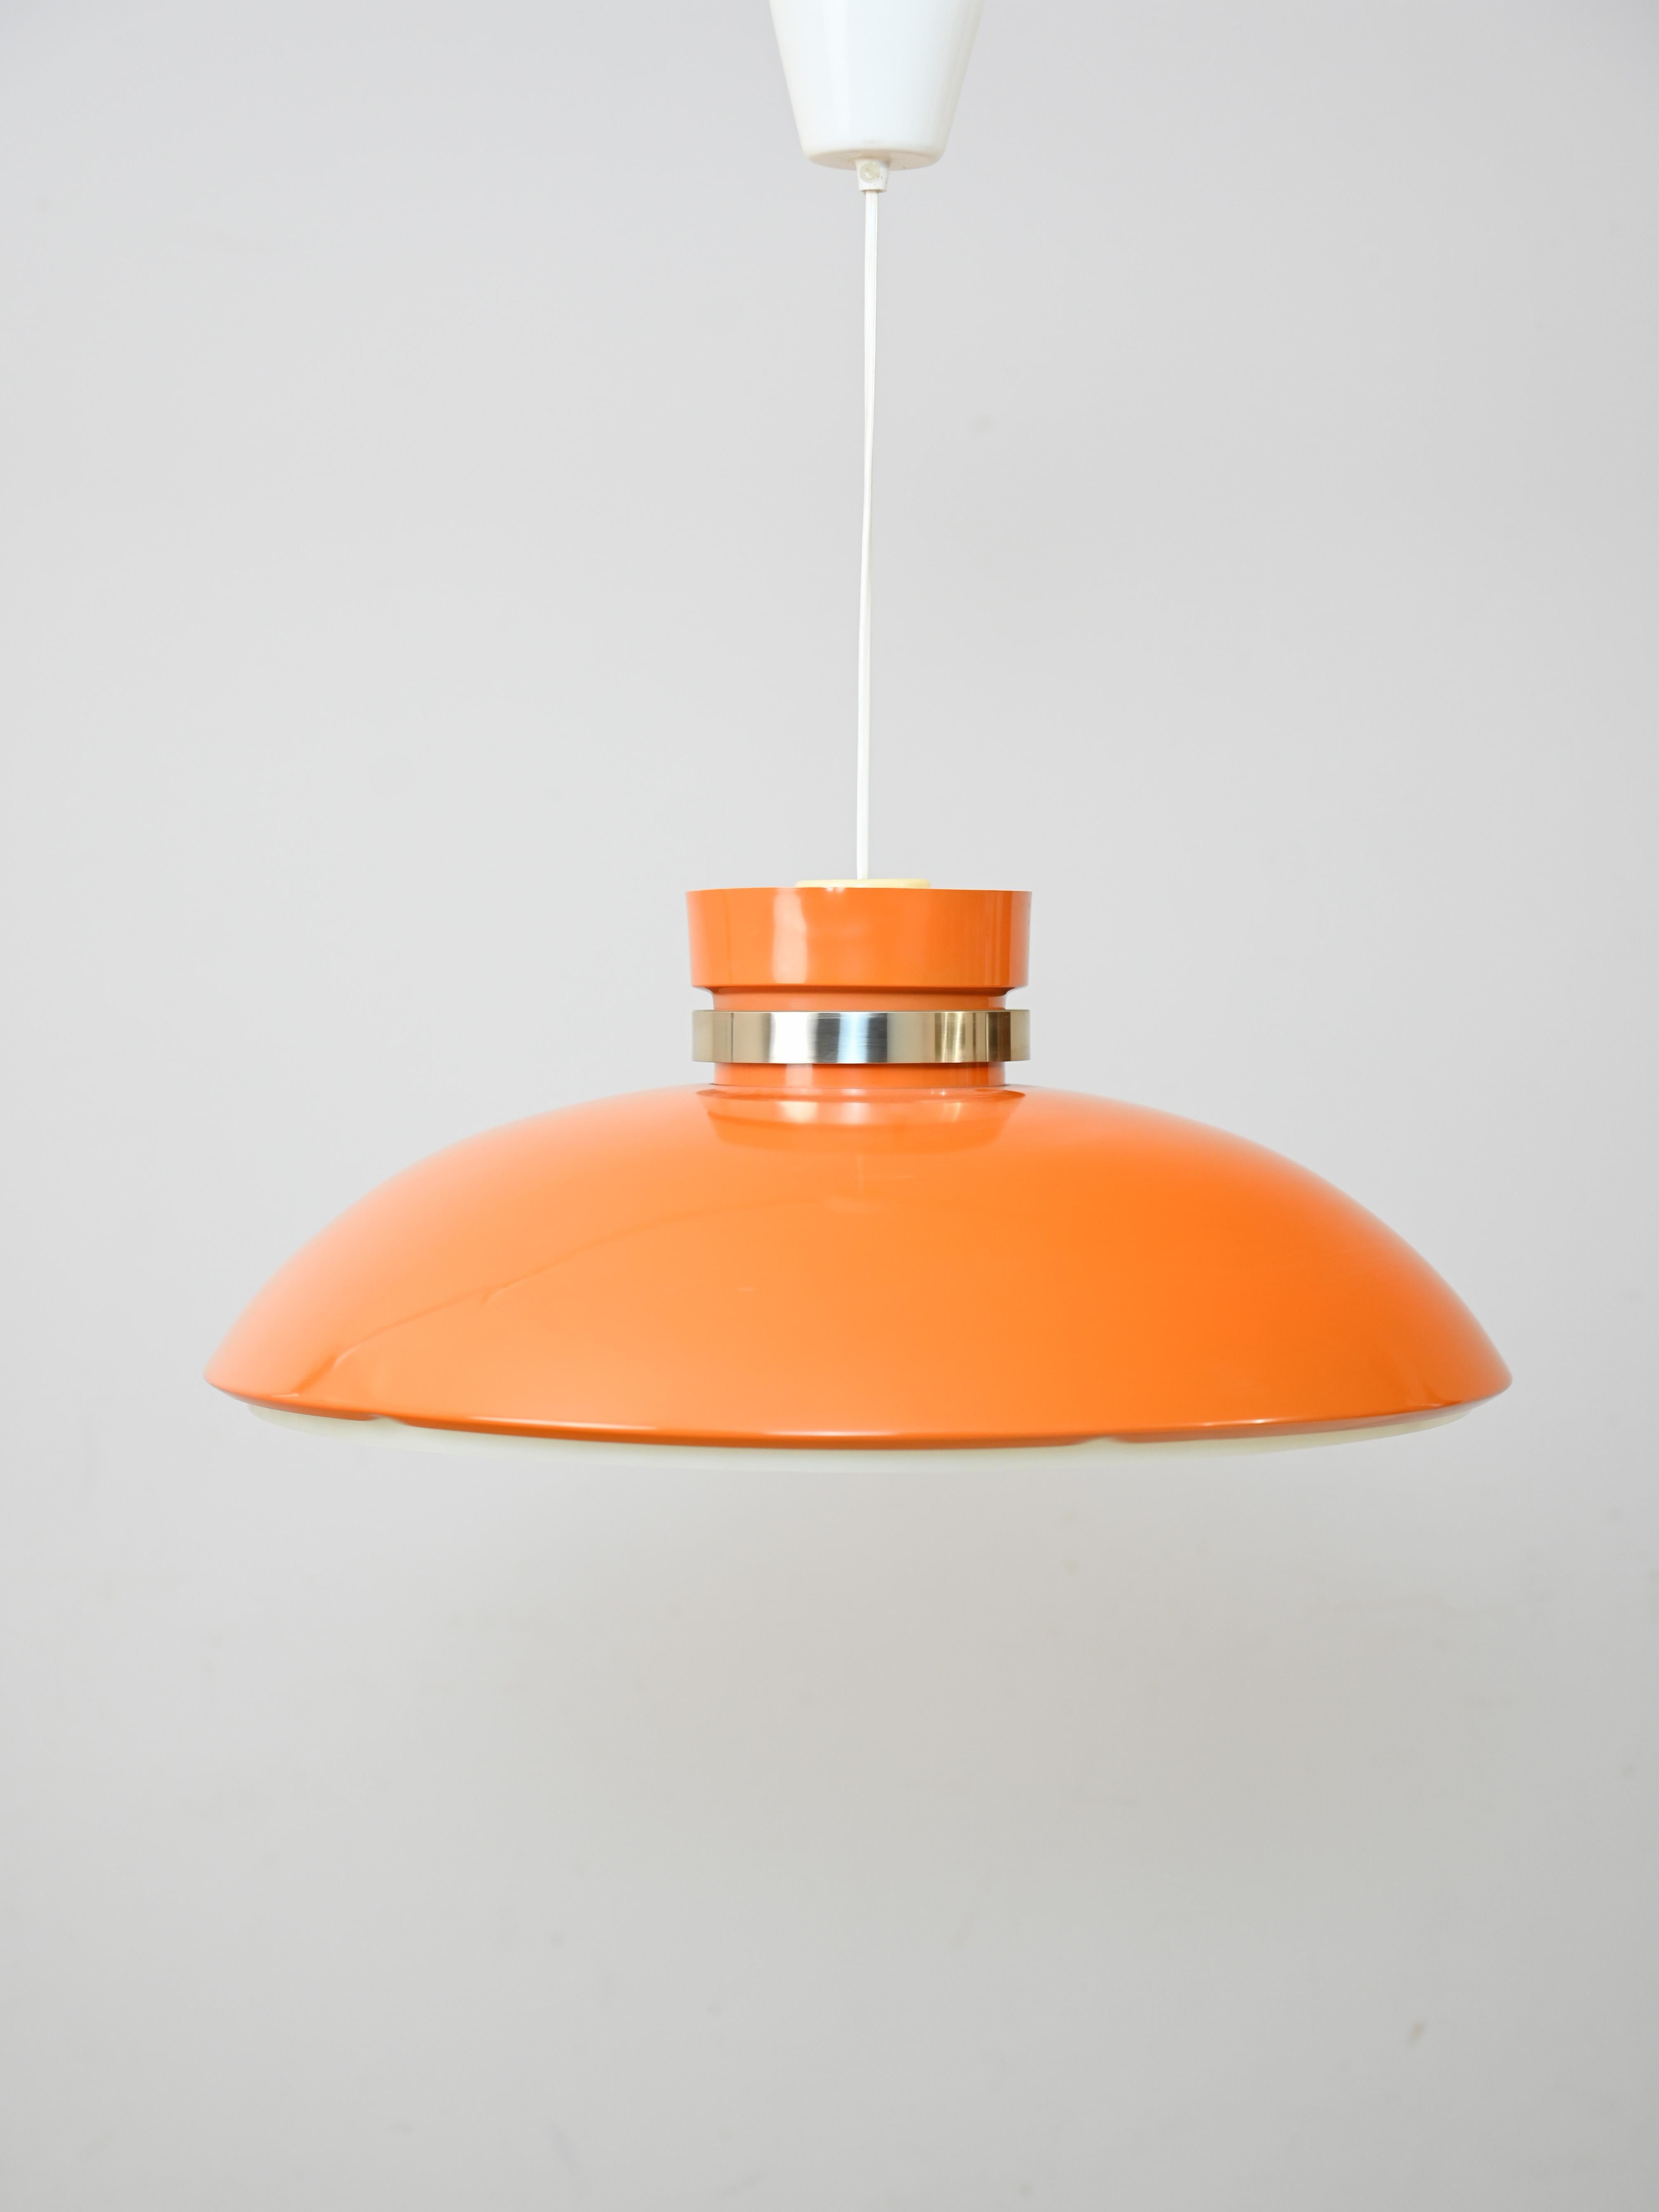 Original Scandinavian 1960s lamp with orange shade.

A modern antique piece with a simple design that is still relevant today. The color and choice of material hark back to mid-century taste. 
The lampshade is made of orange hard plastic and